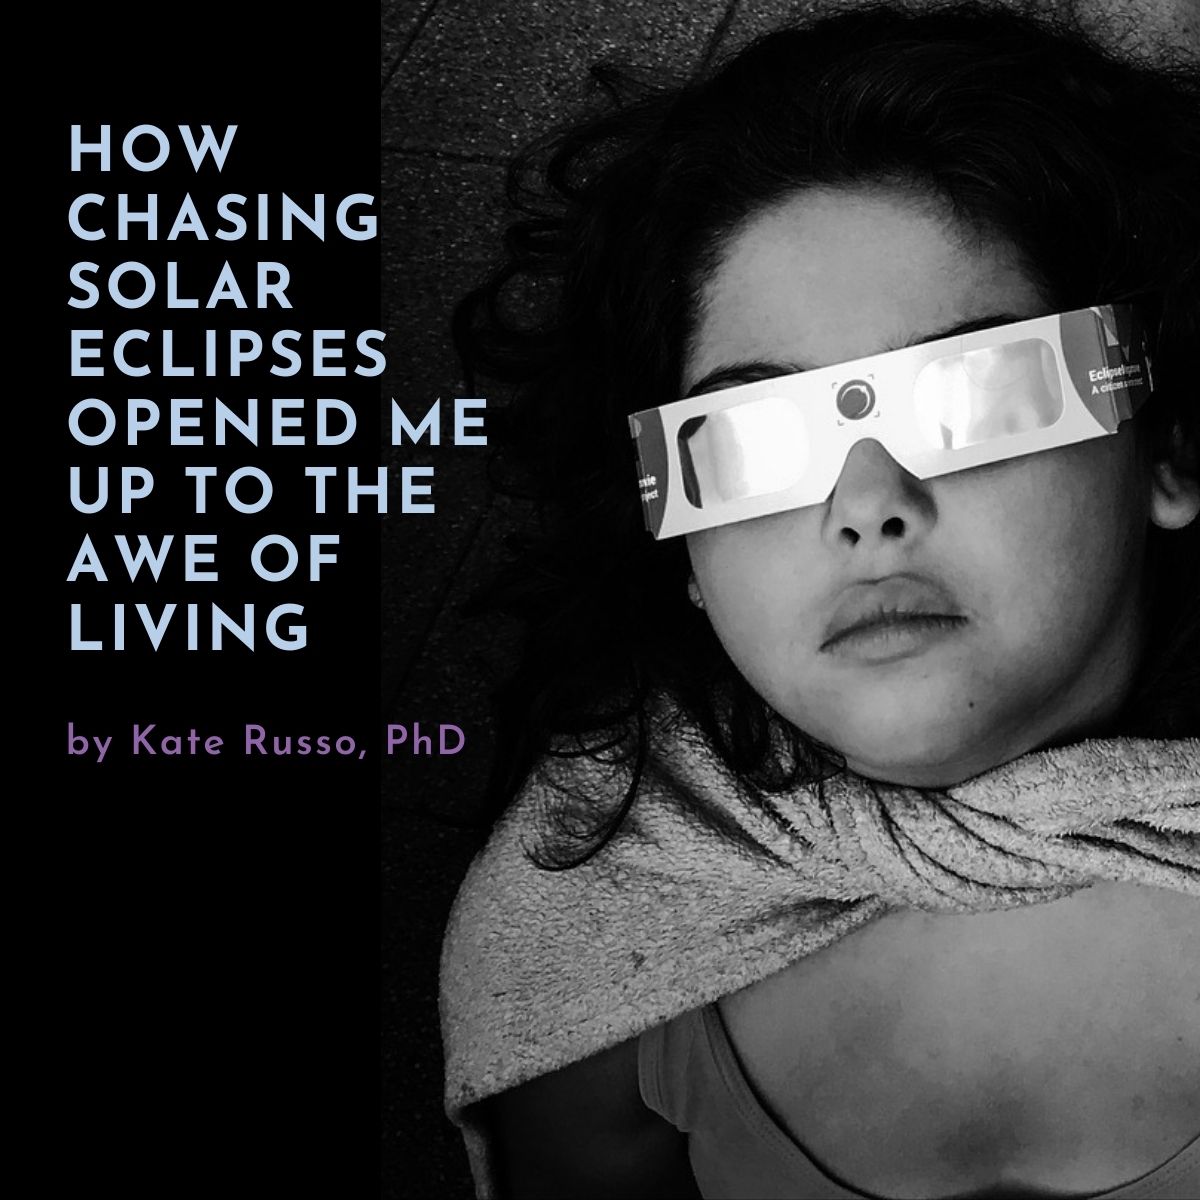 Chasing Solar Eclipes Opened me to the Awe of Life with Girl wearing solar eclipse eyeglasses